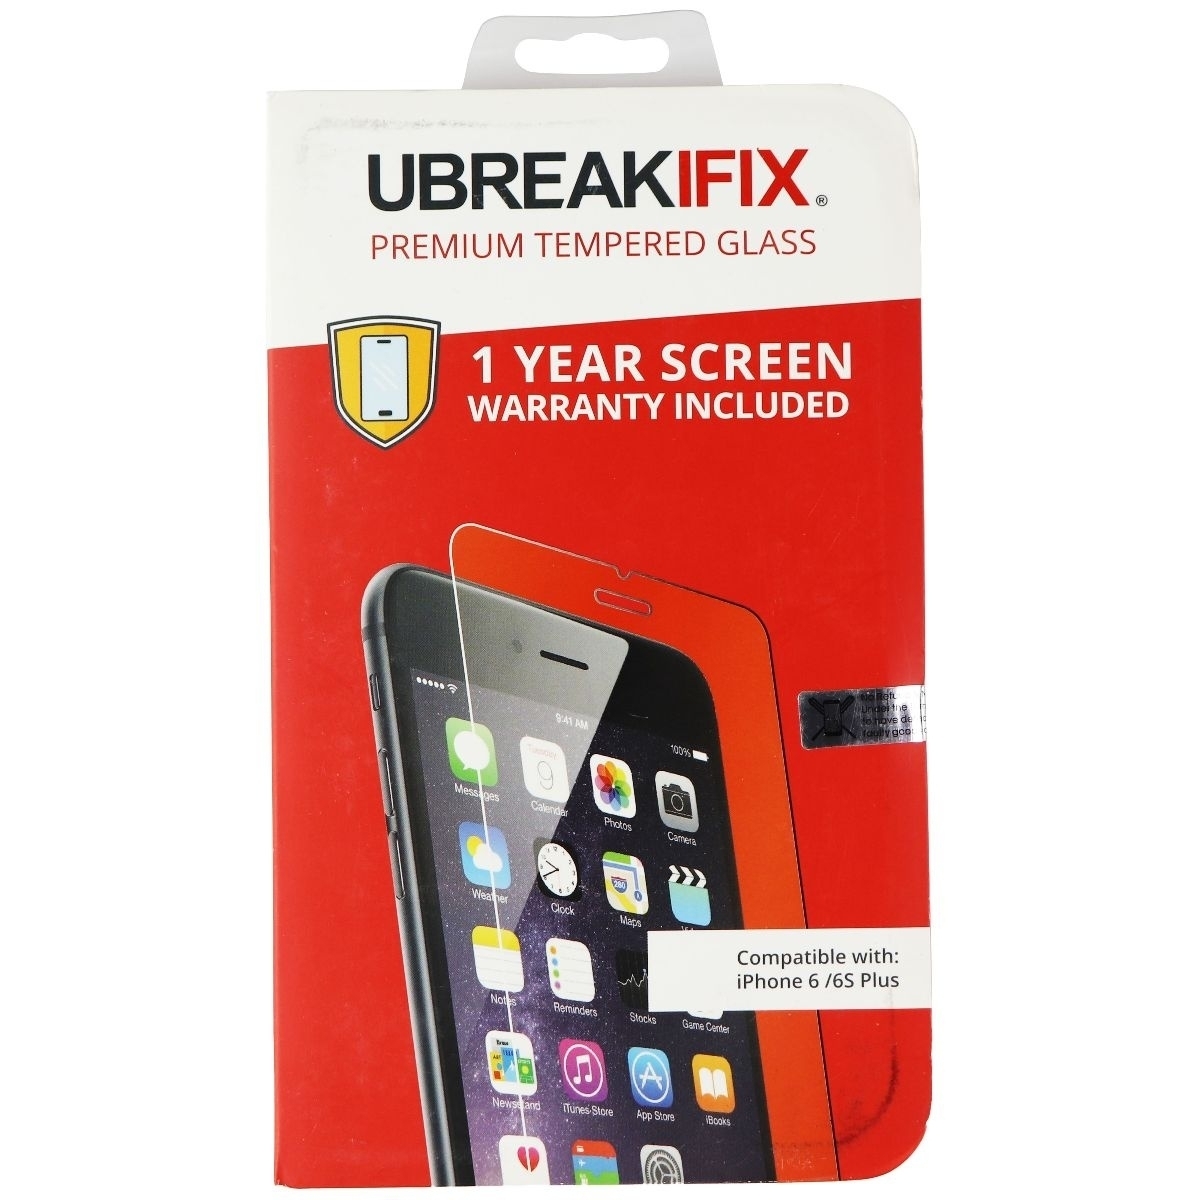 UBREAKIFIX Tempered Glass Screen Protector For Apple IPhone 6/6s Plus